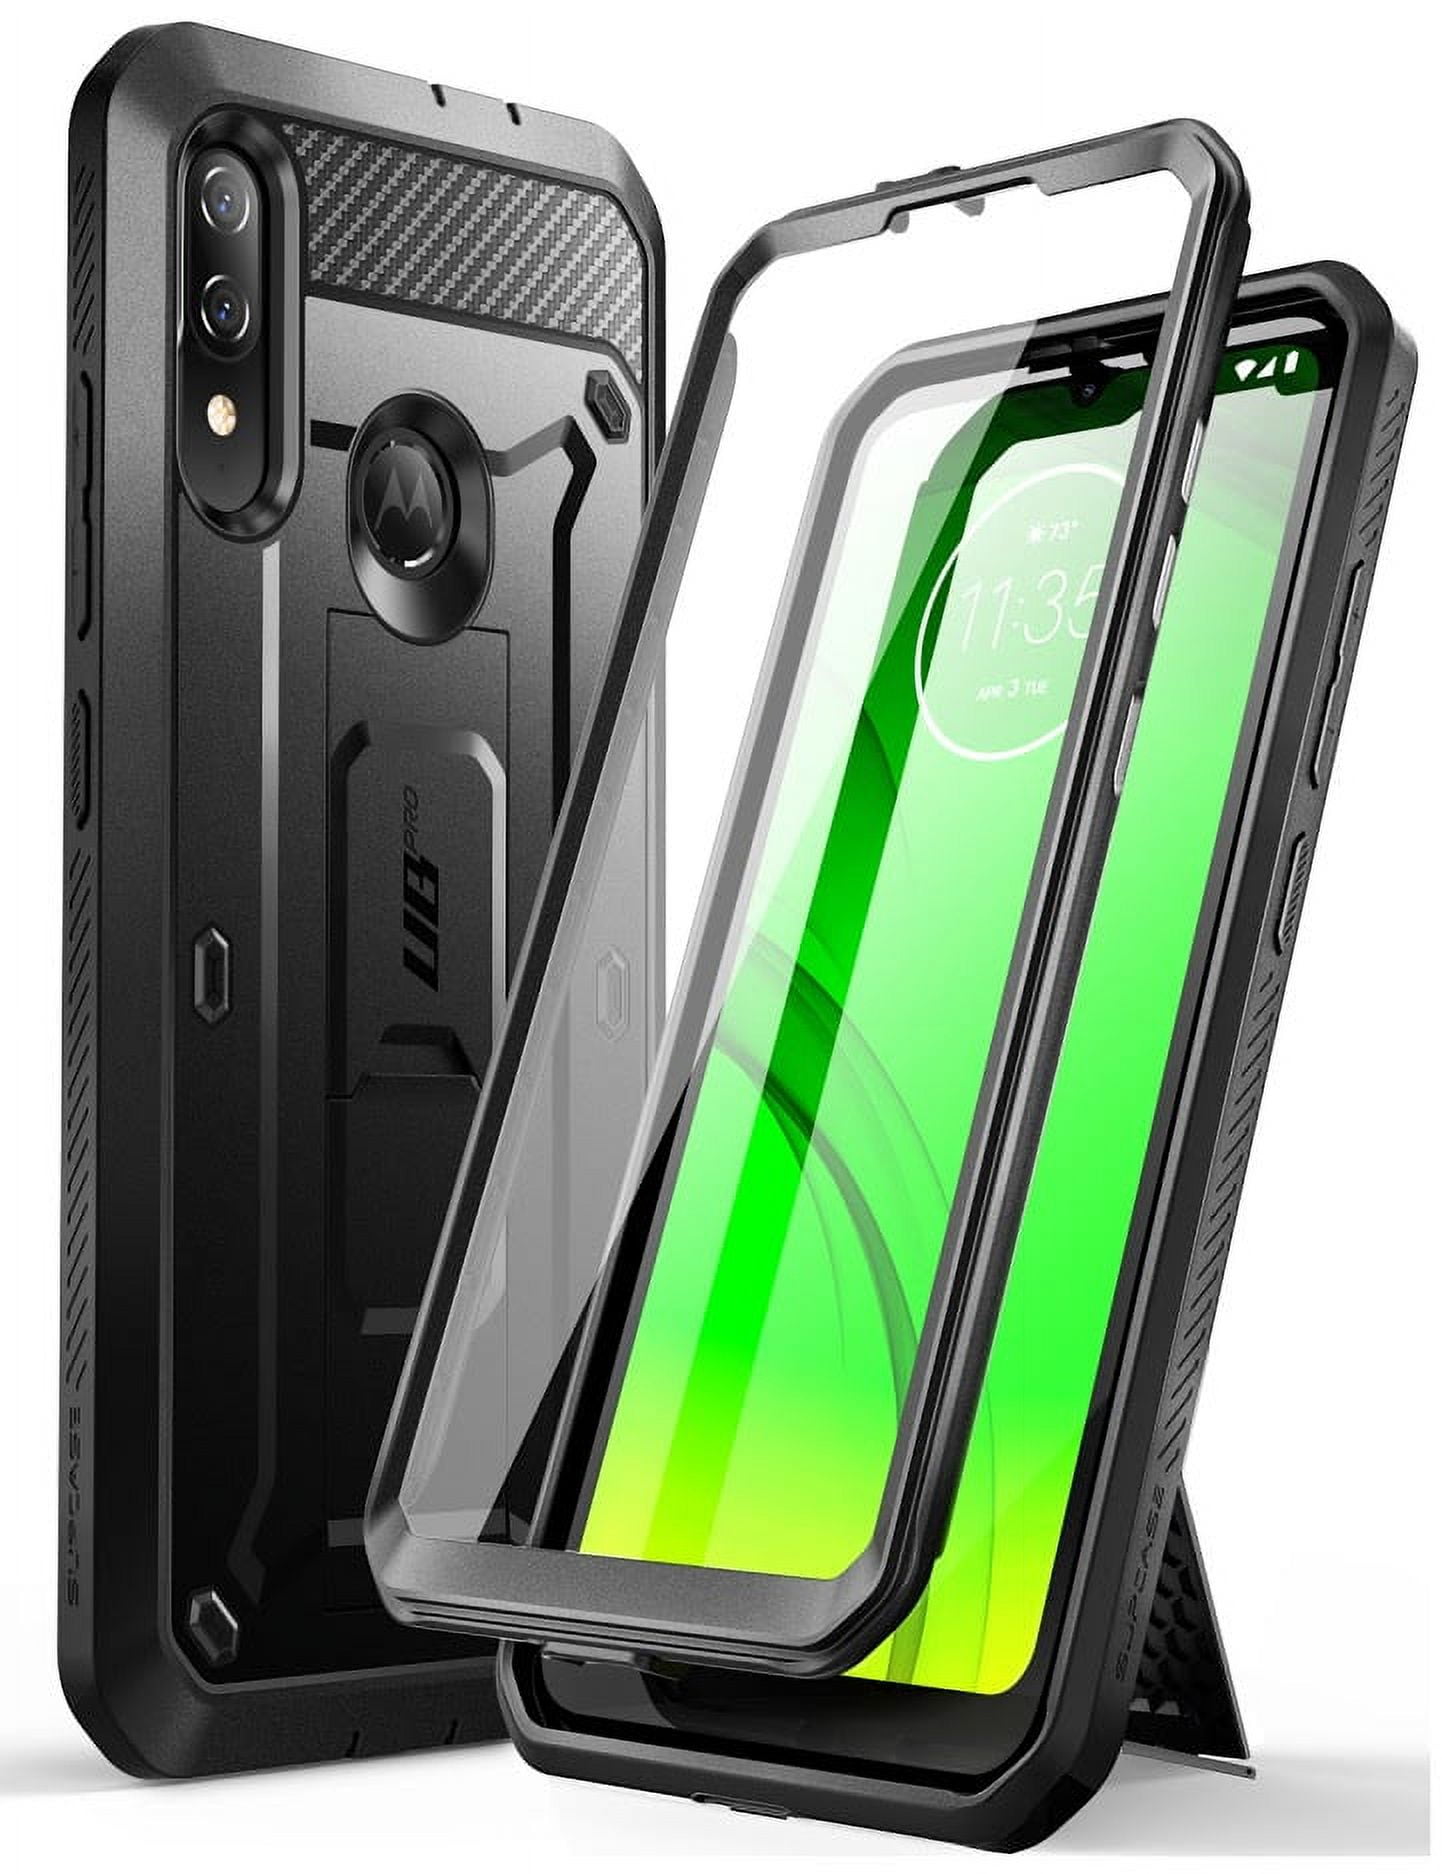 SUPCASE Huawei P30 Pro Case (2019 Release), [Unicorn Beetle Pro Series]  Full-Body Dual Layer Rugged with Holster & Kickstand (Black) - 6.47 inches